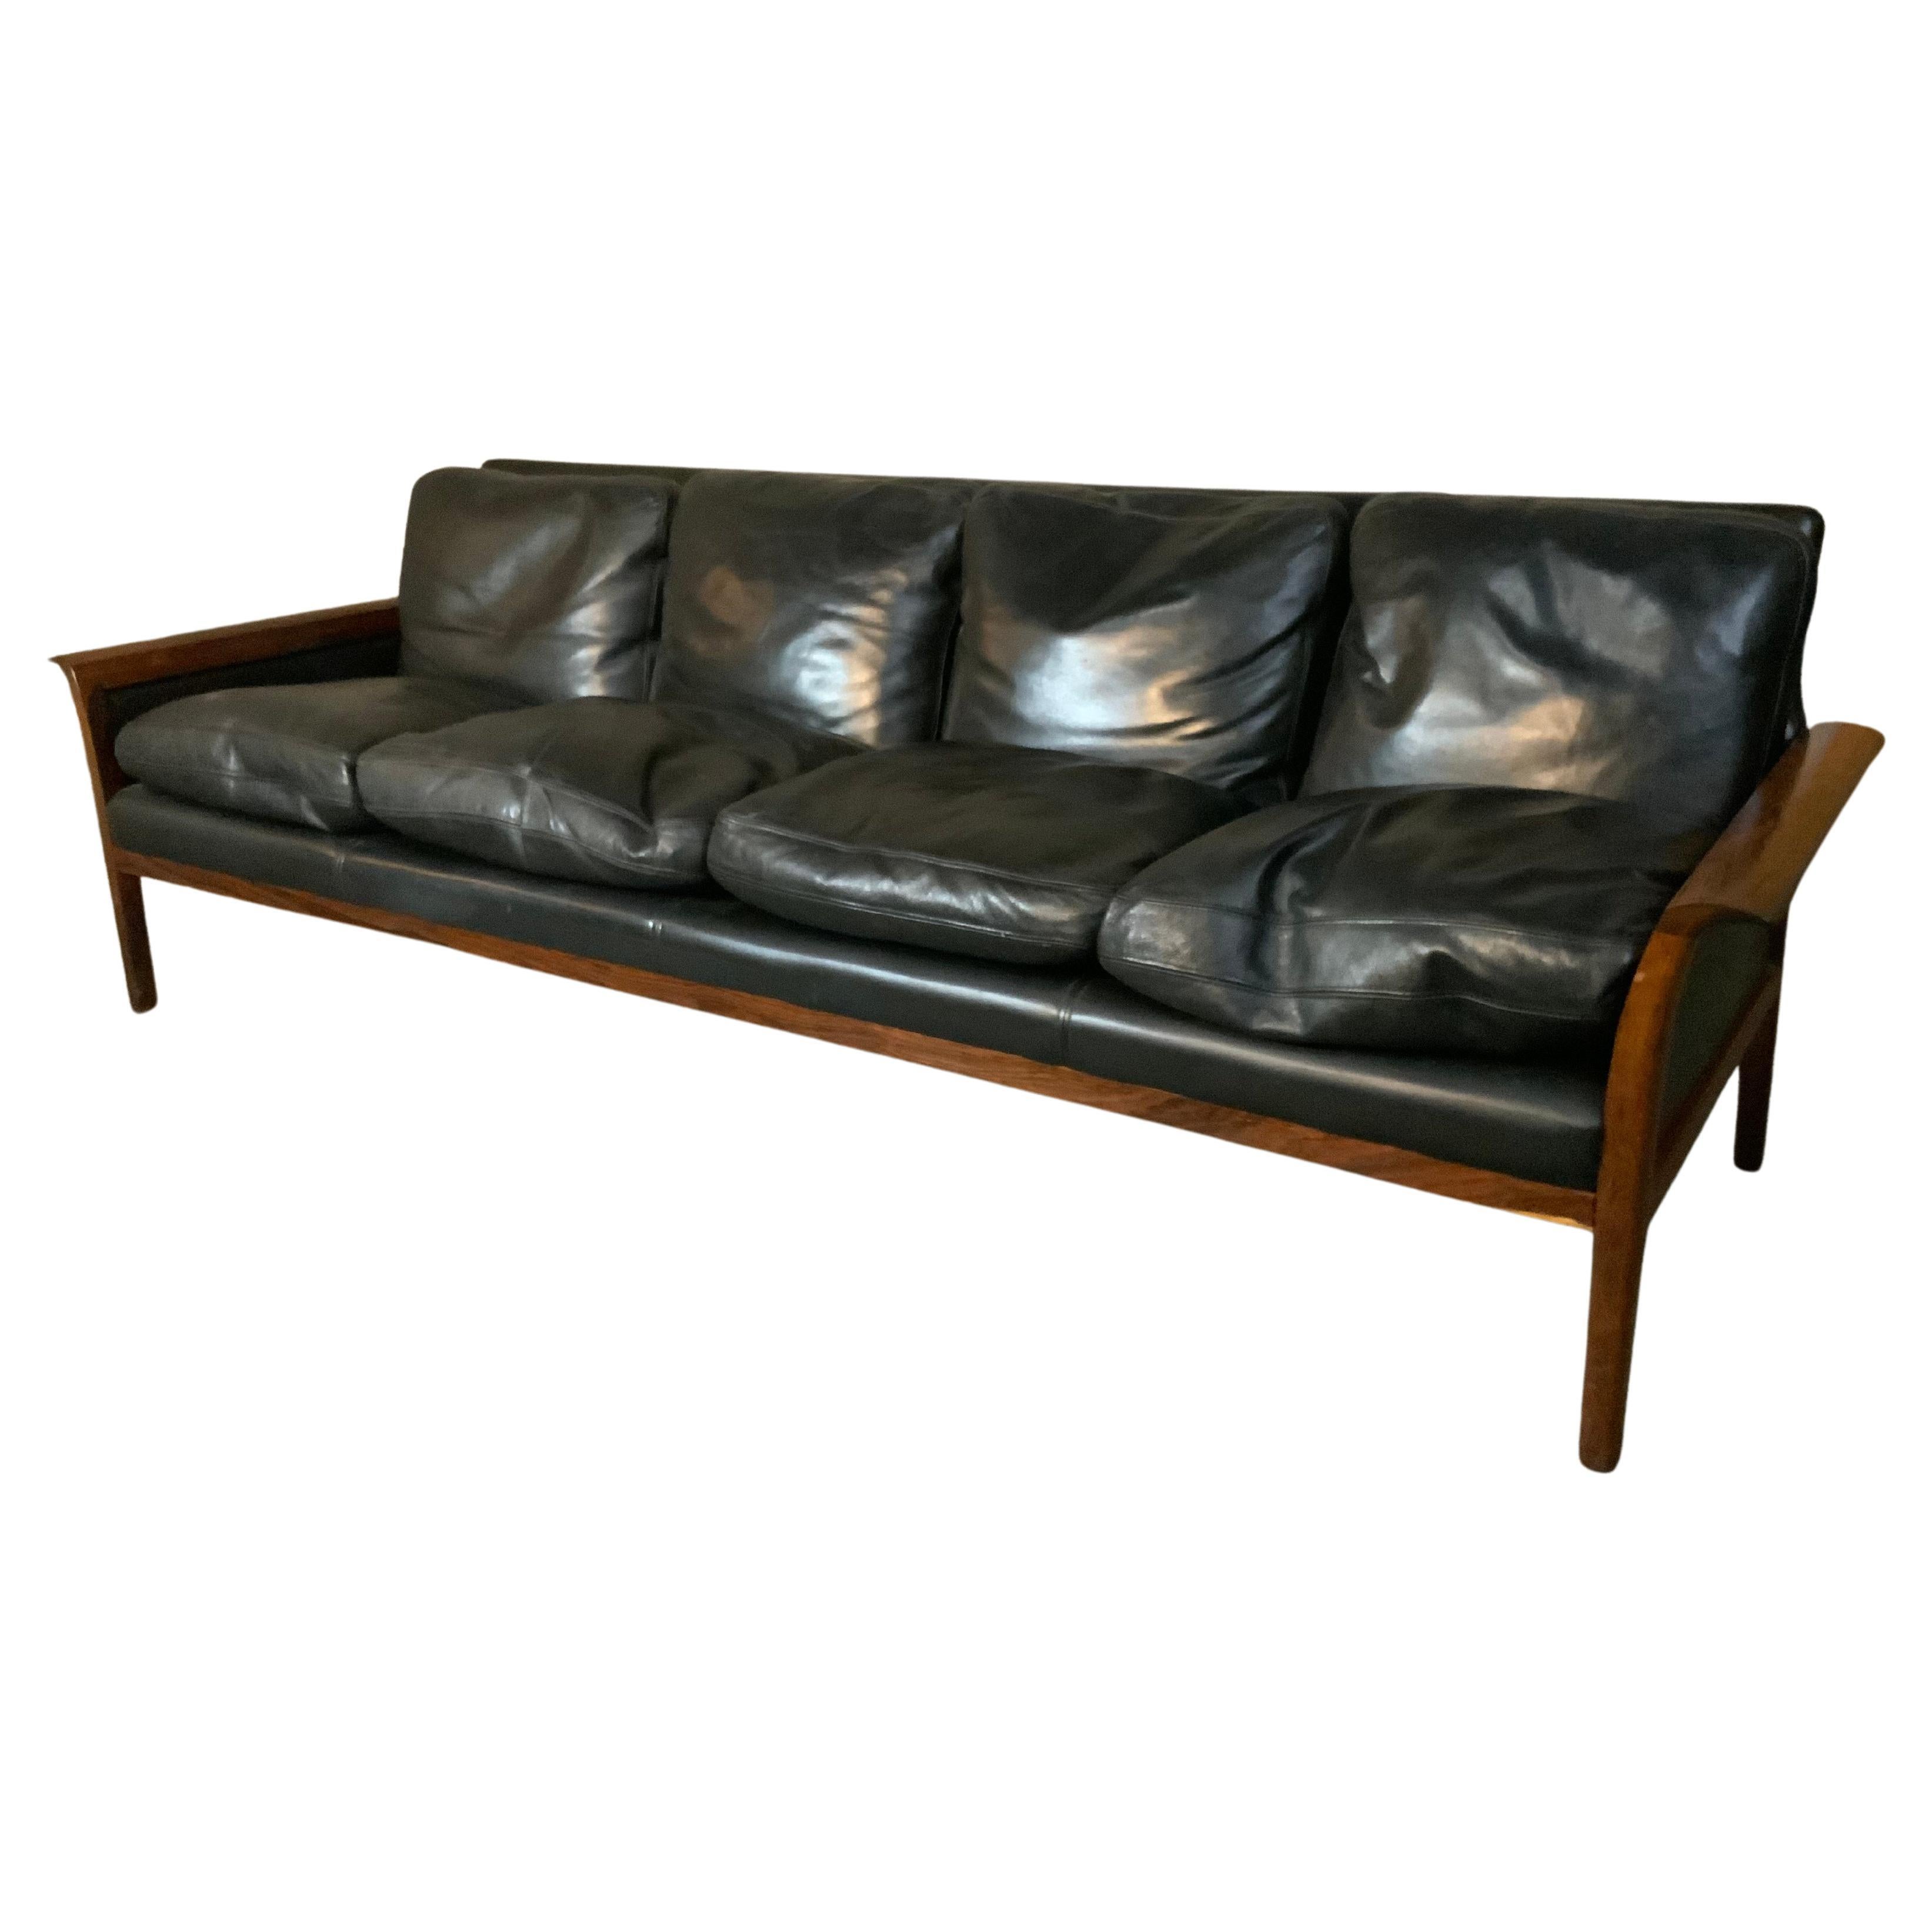 Knut Saeter for Vatne Mobler Black Leather and Rosewood Four-Seat Sofa Couch